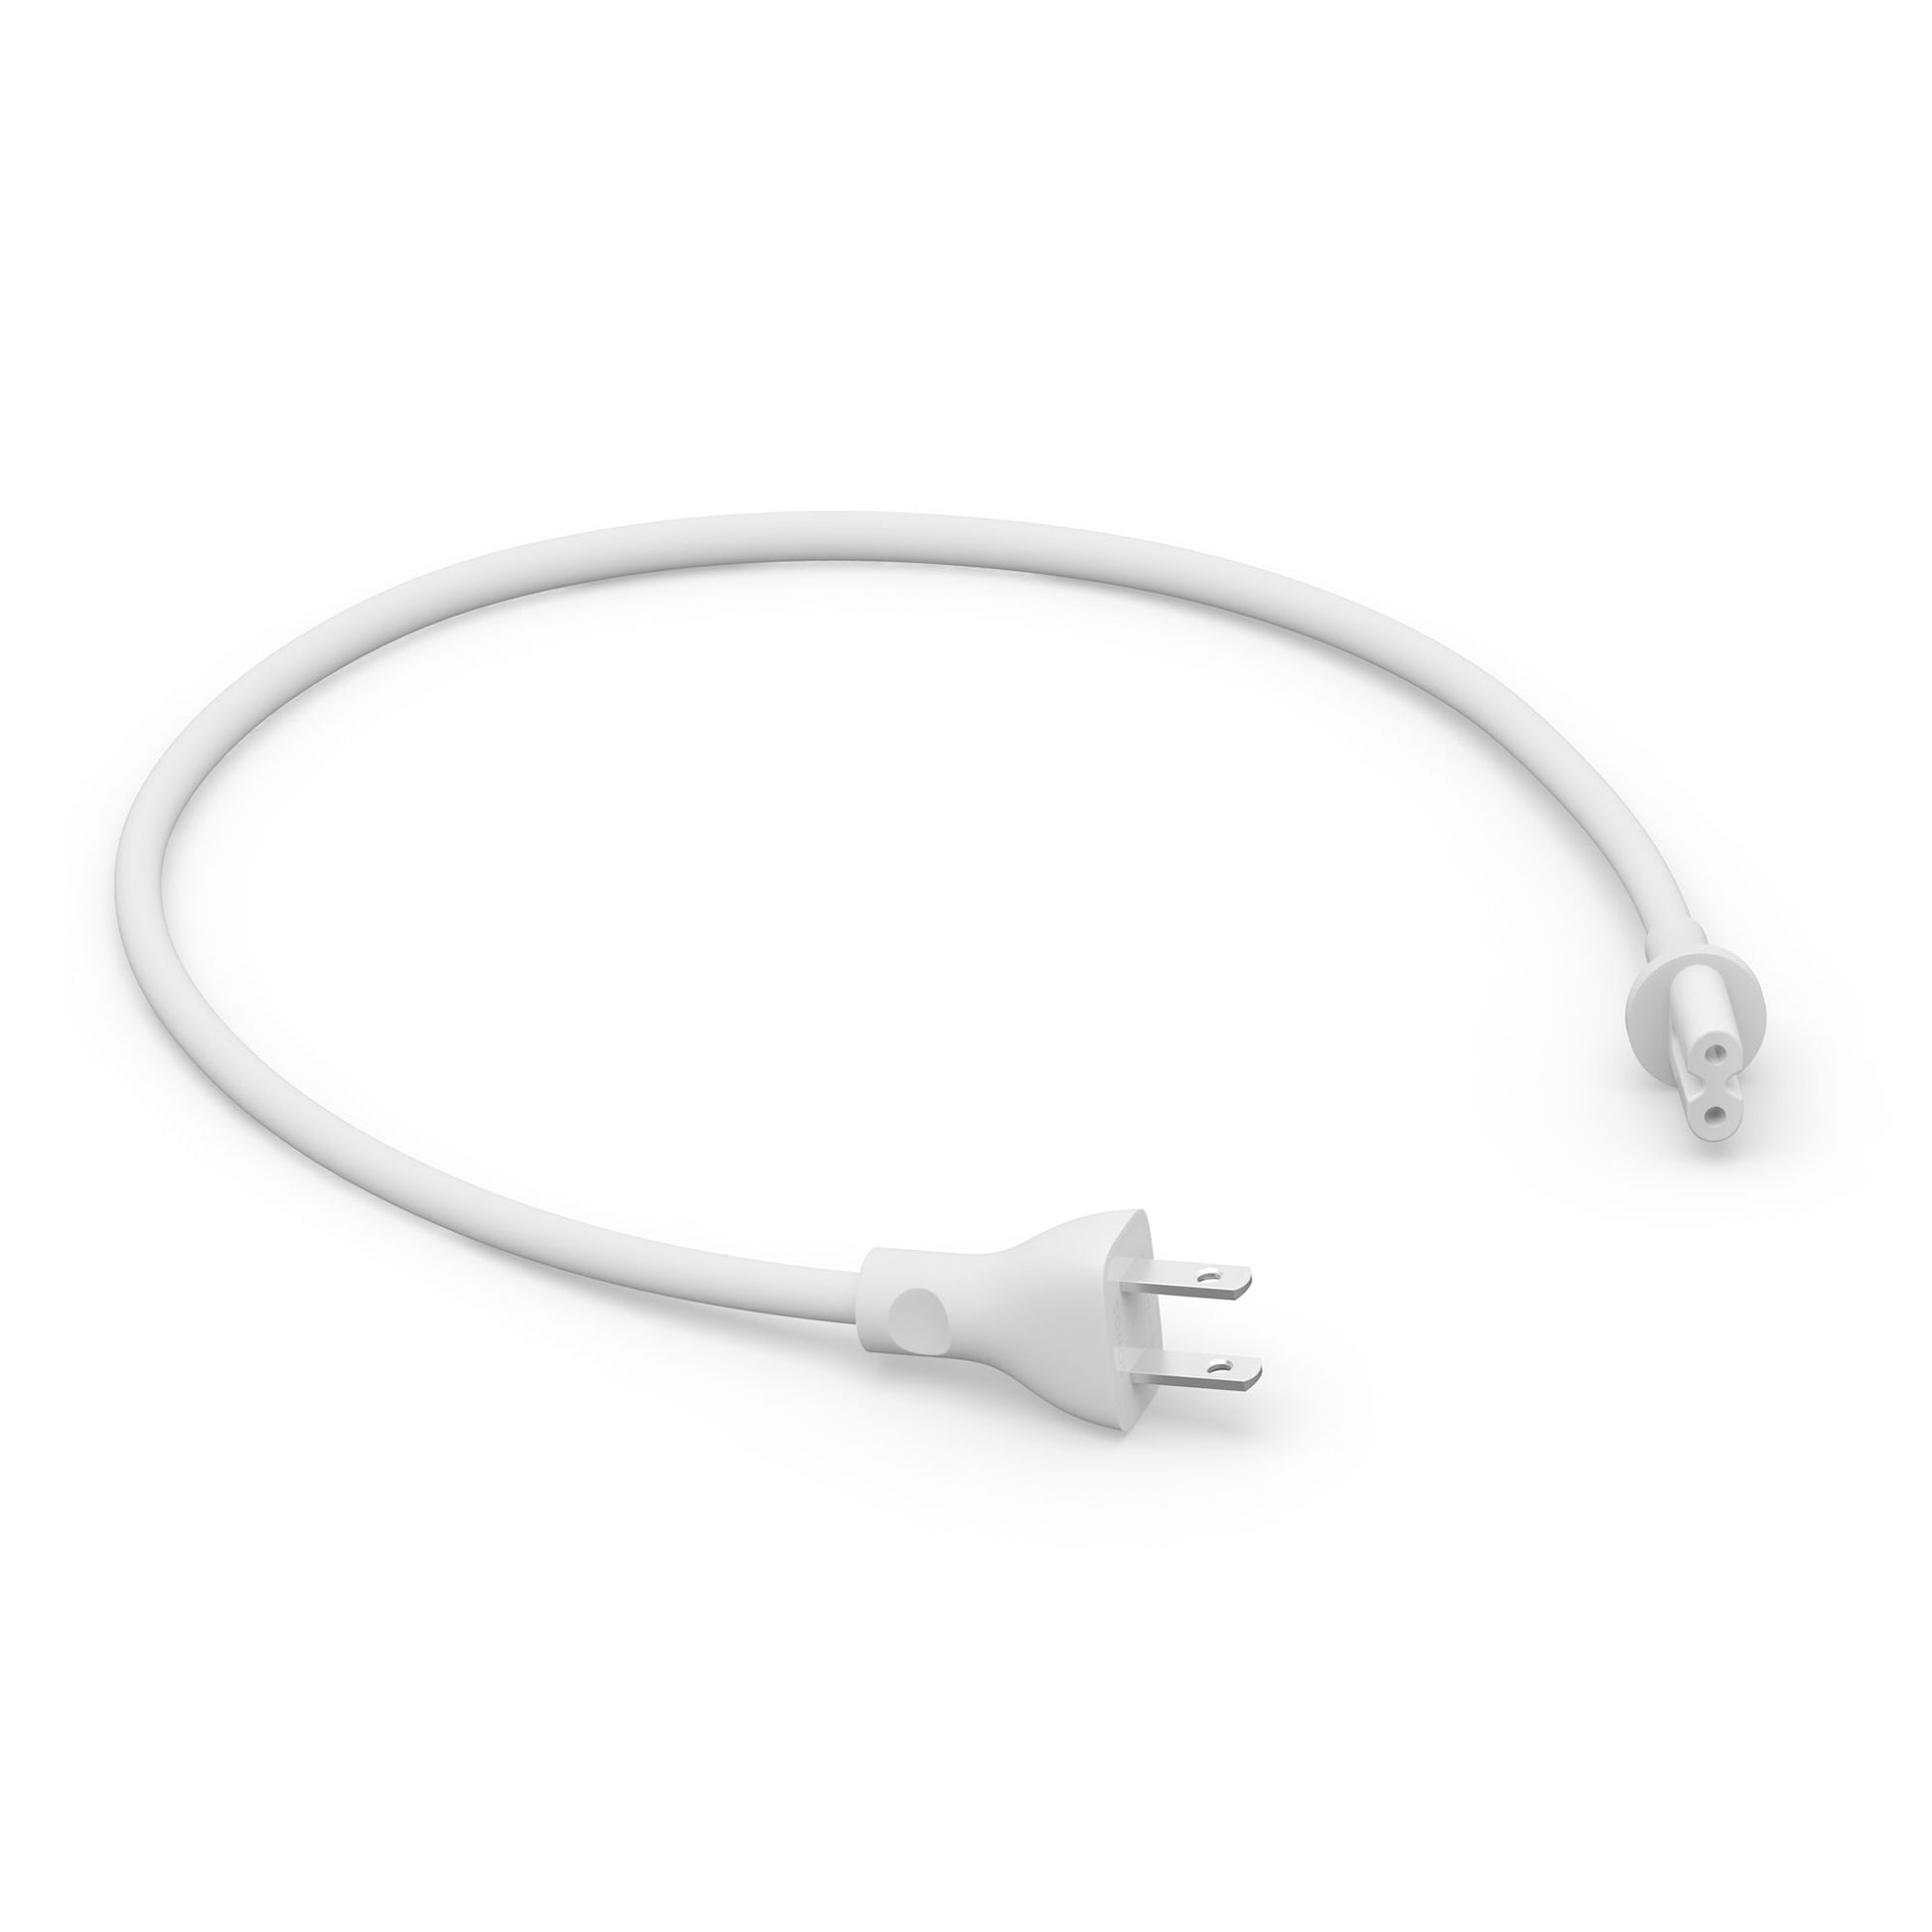 Sonos Power Cable 19.7in (White) - Top View